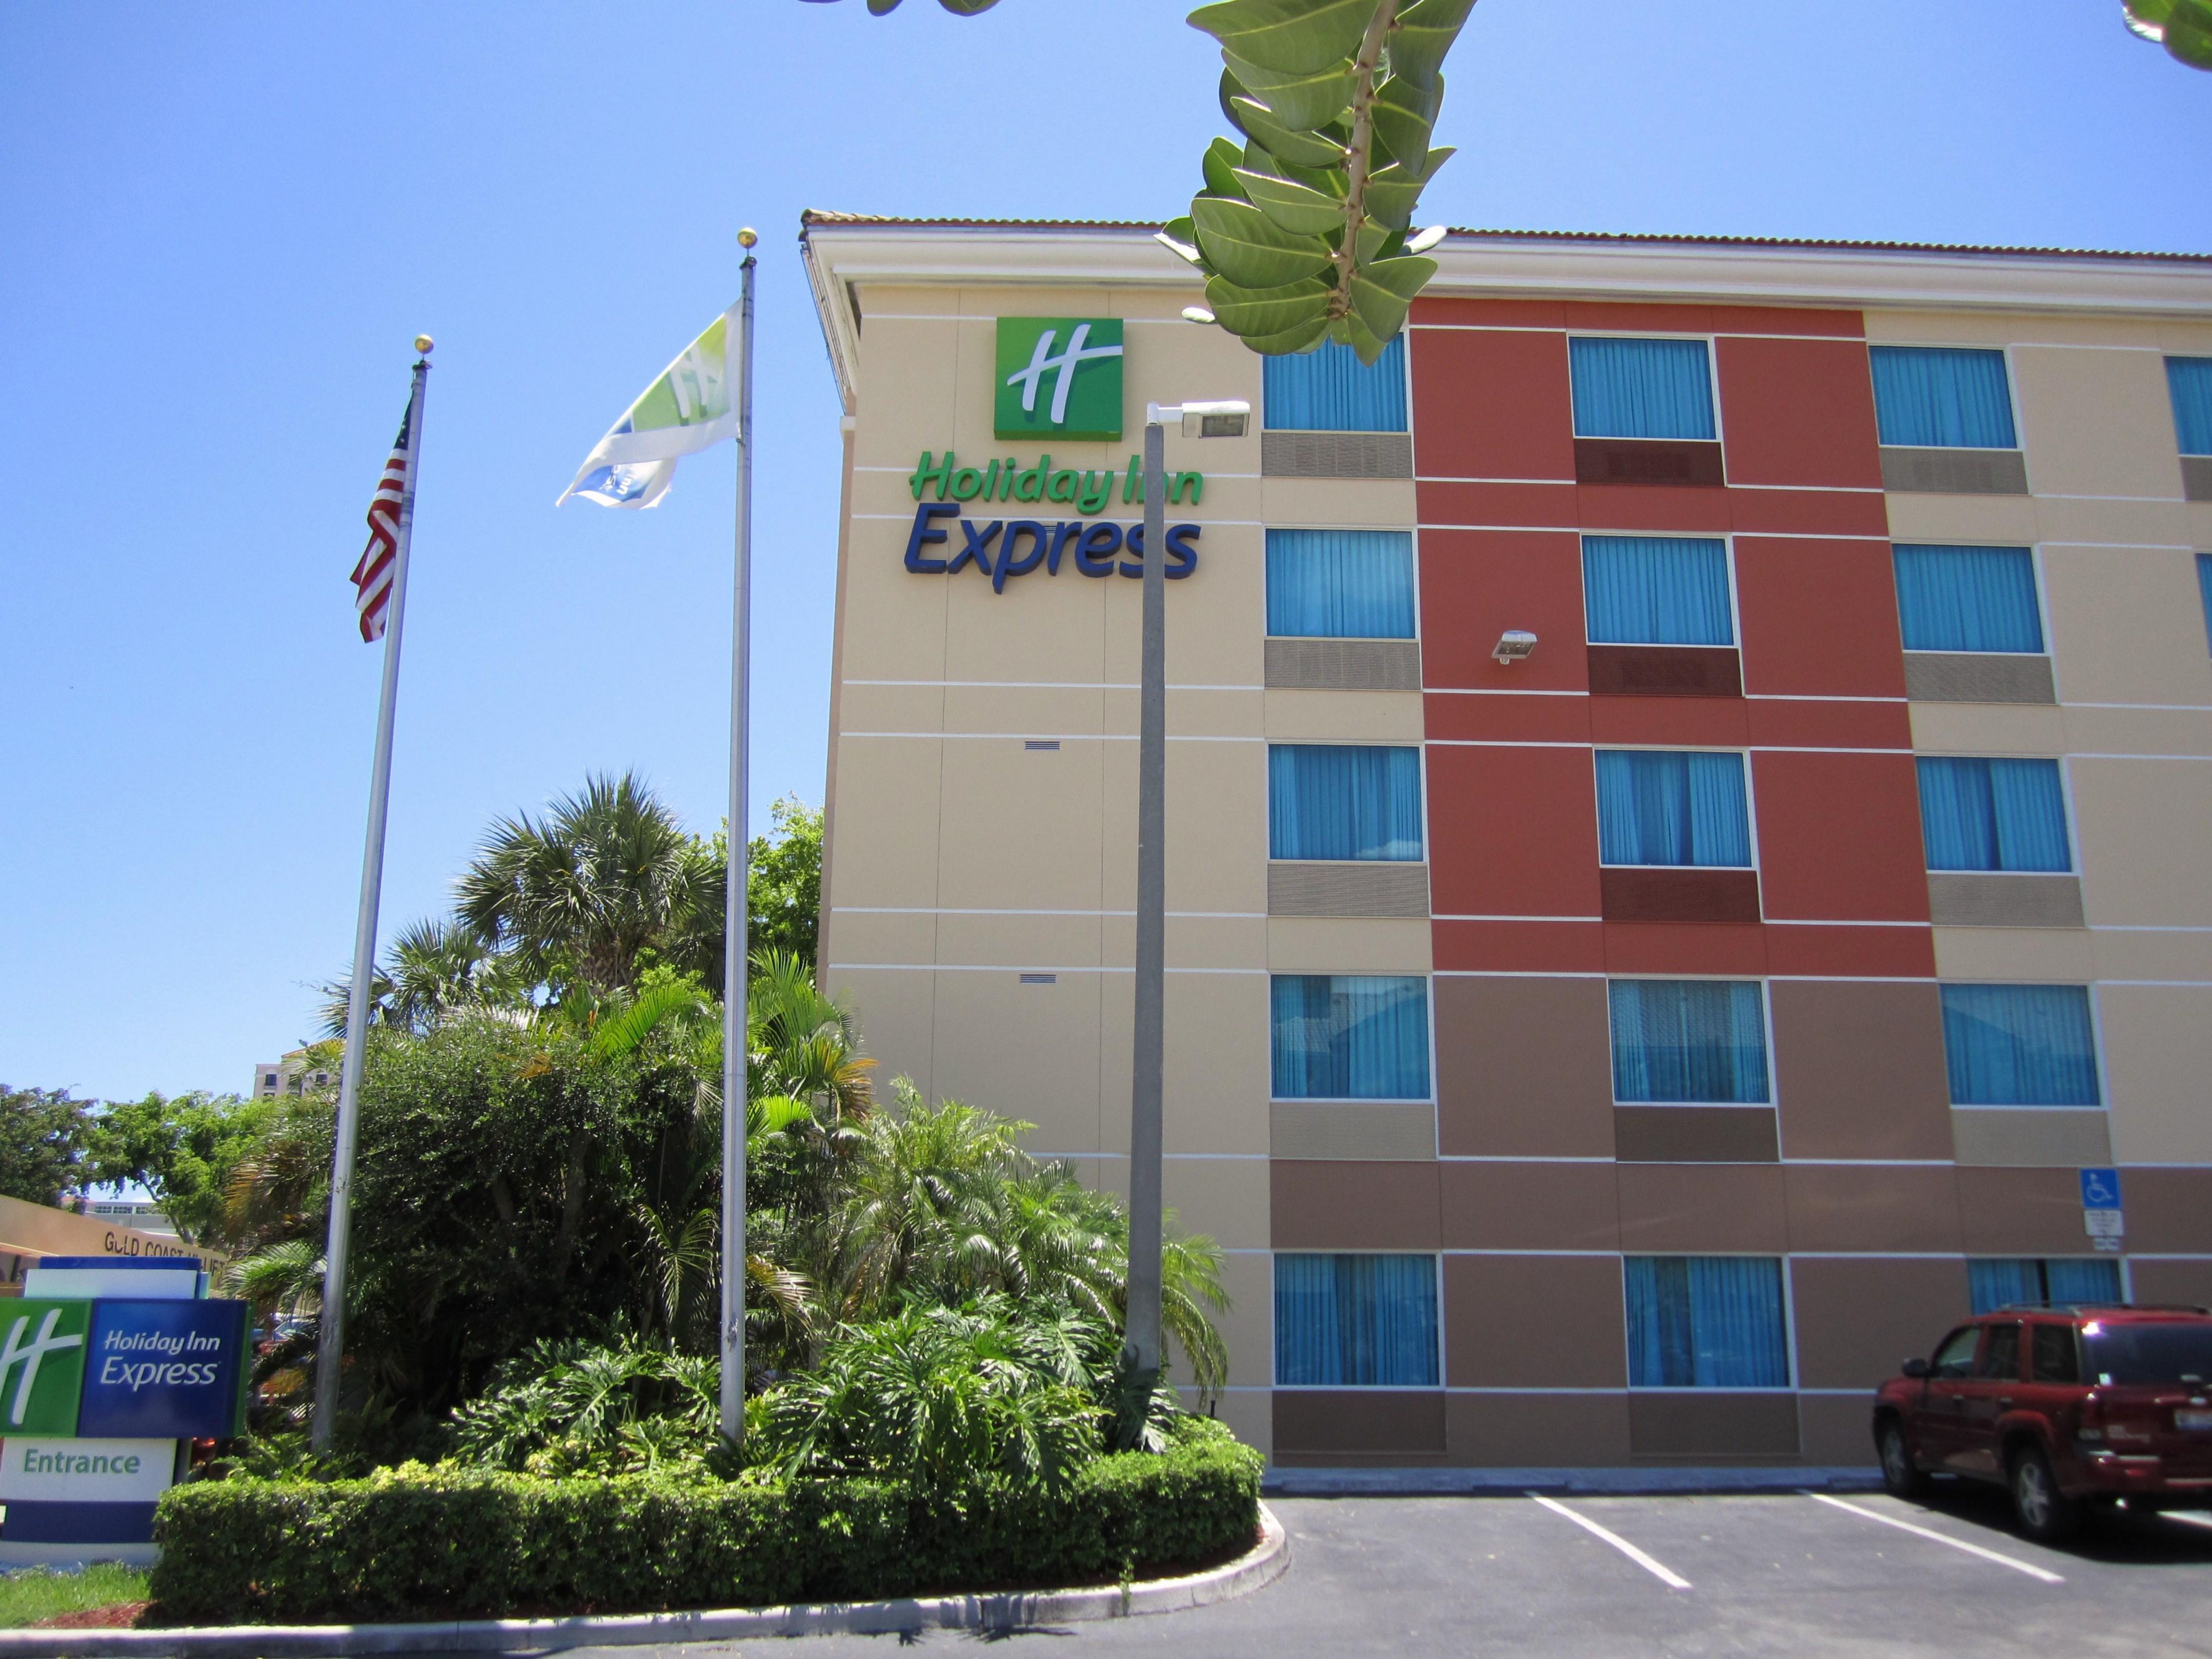 Holiday Inn Express Fort Lauderdale 2531712628 4x3